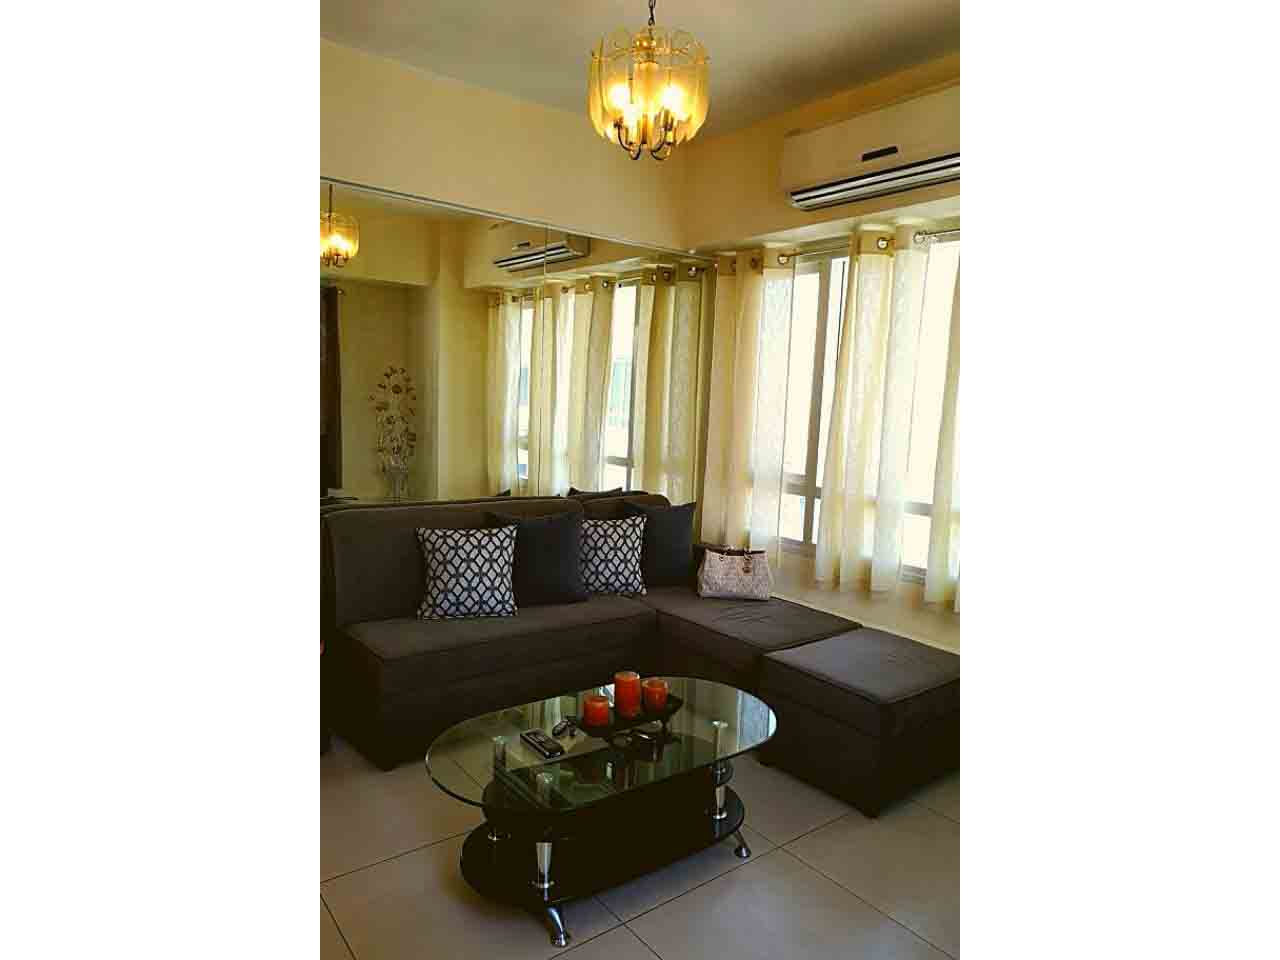 2BR Condo for Lease in The Columns at Legaspi Village, Makati